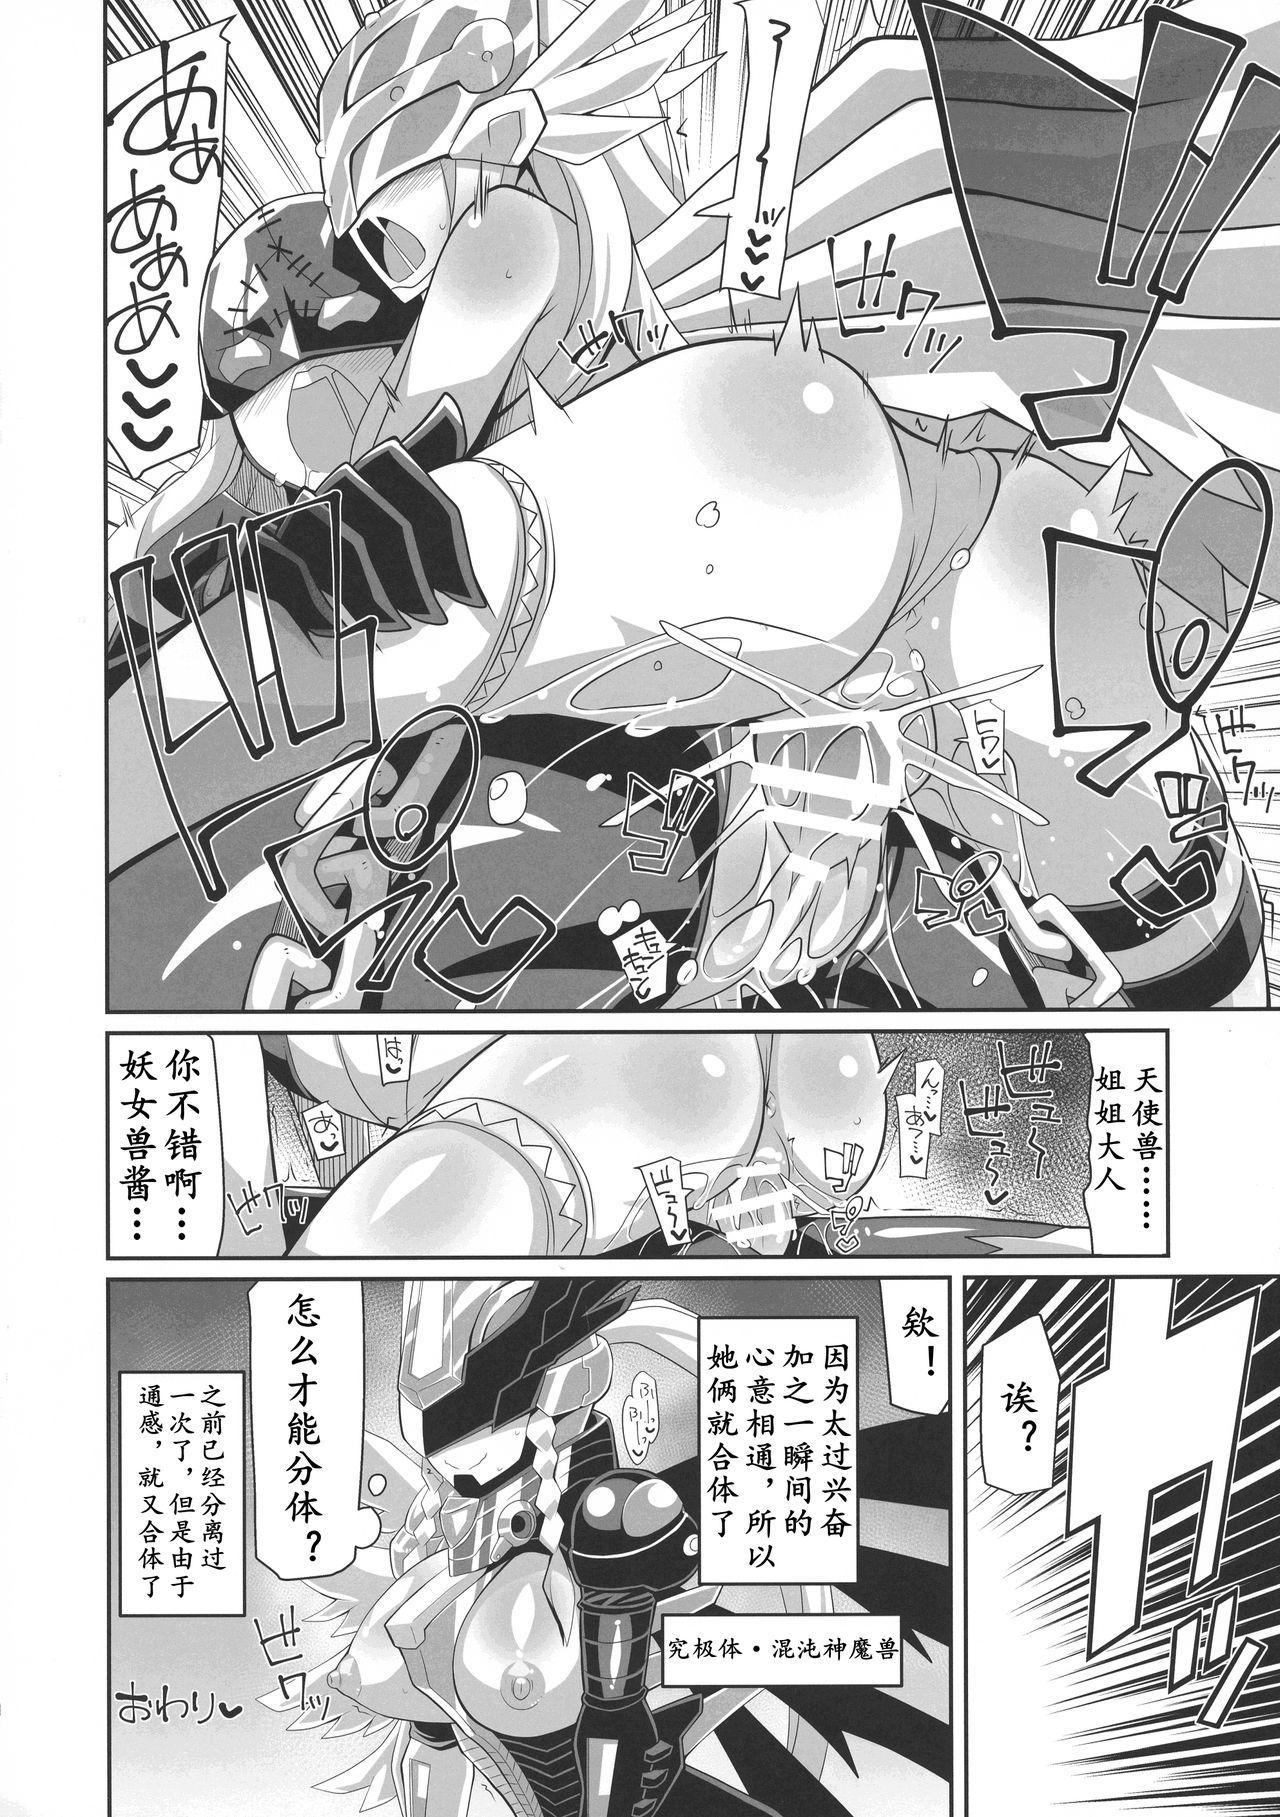 Home ANGELSxDEMONS | 莫斯提兽 - Digimon Stepdaughter - Page 11